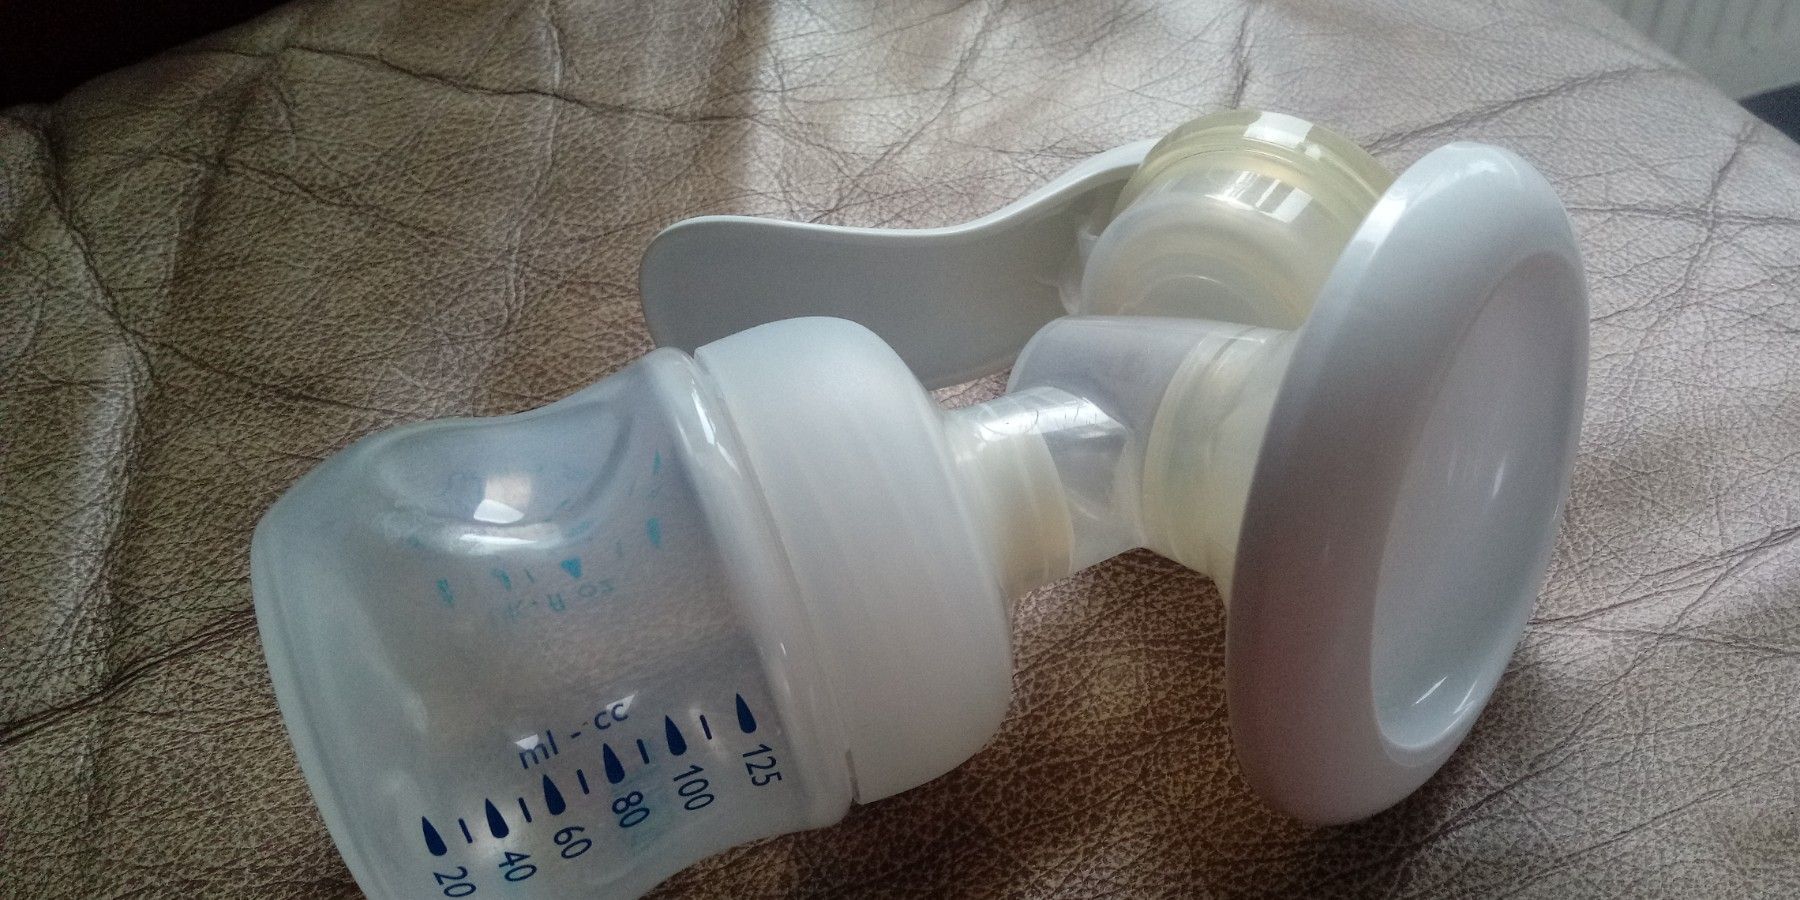 Breast pump which might be used by the cultures who breastfeed the longest.